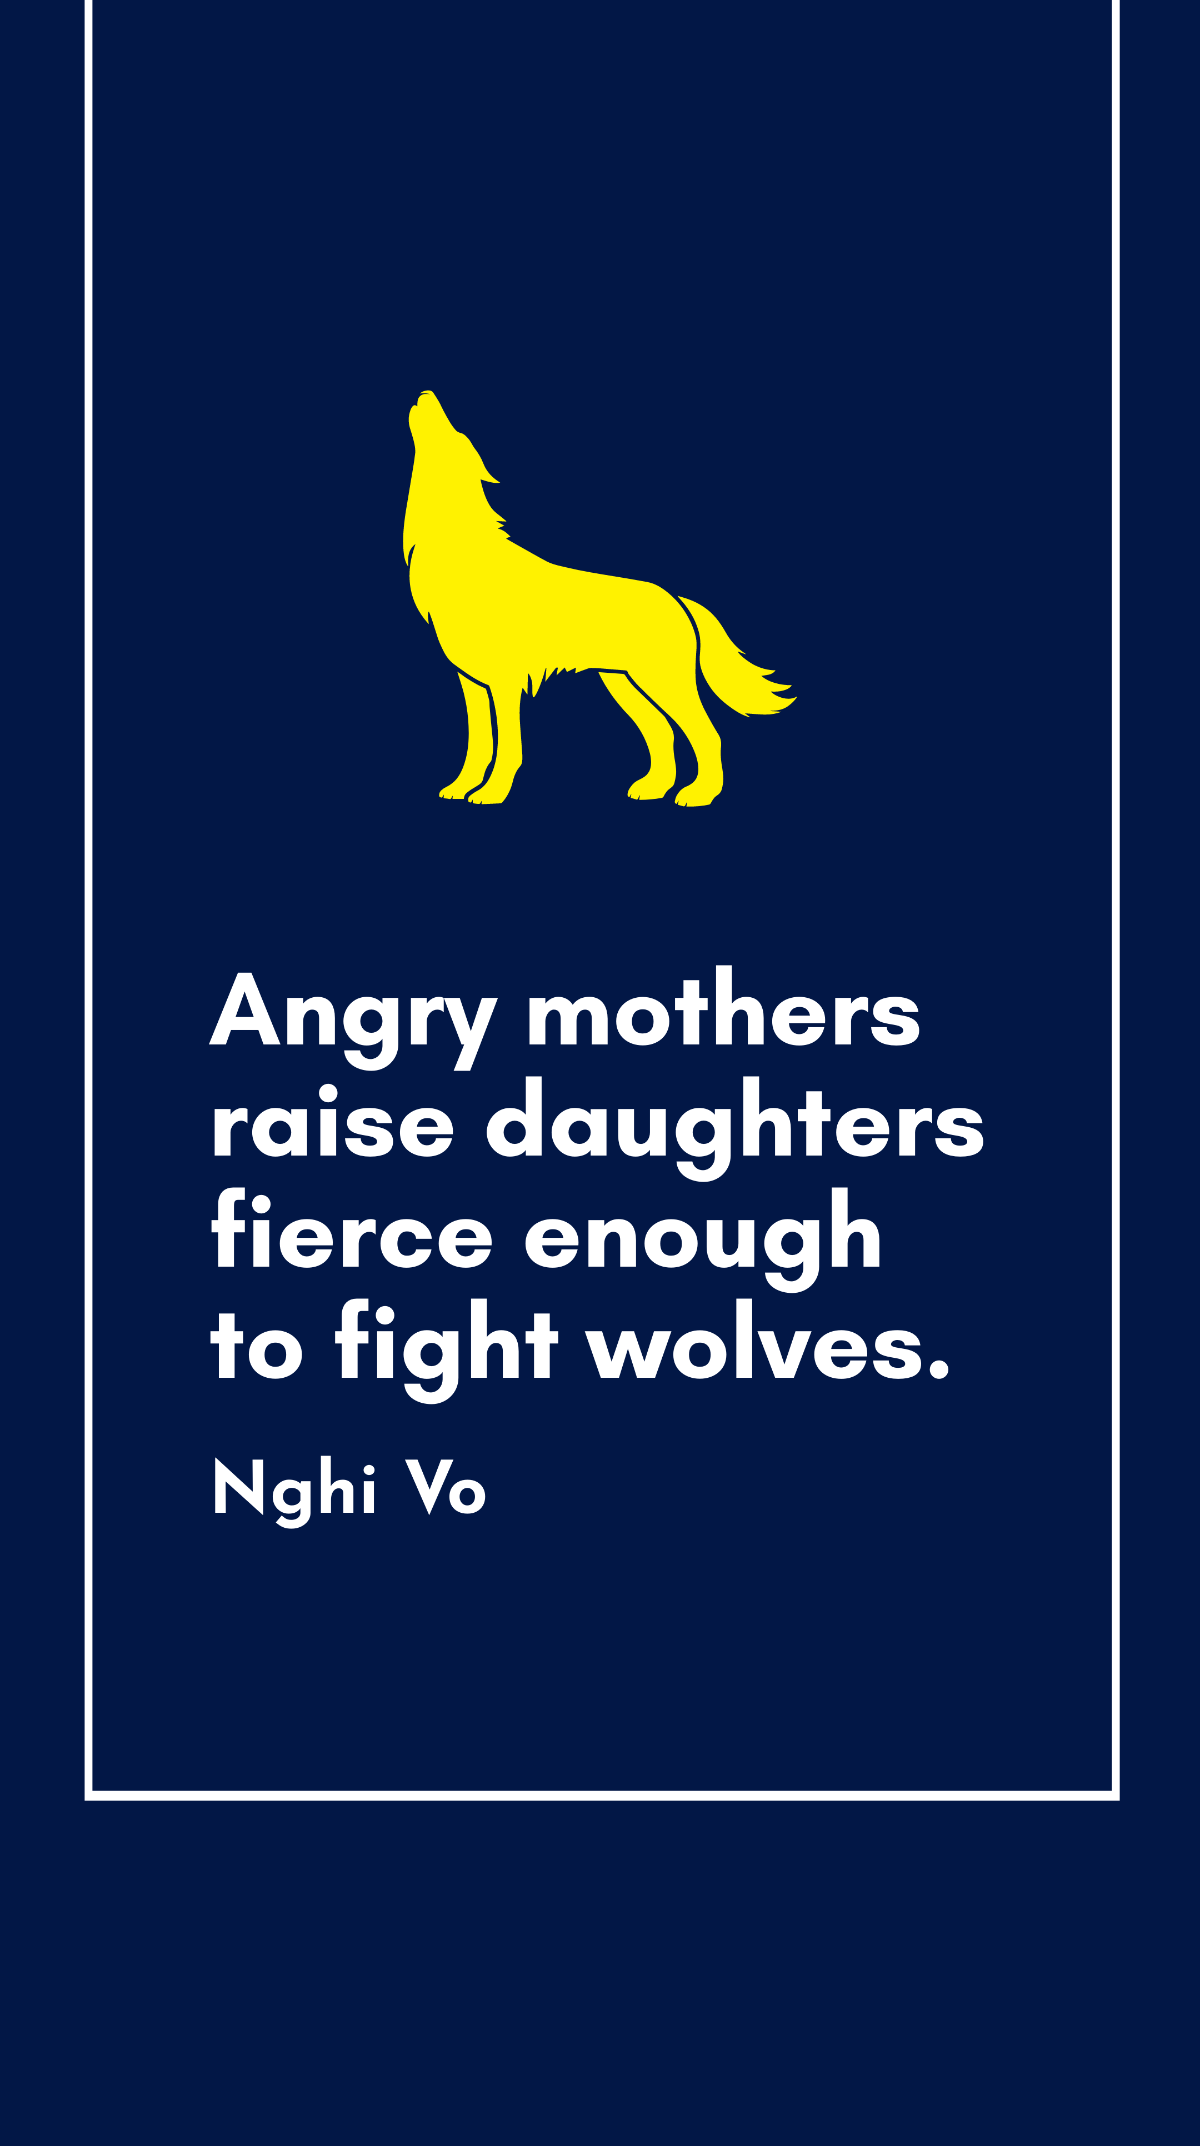 Nghi Vo - Angry mothers raise daughters fierce enough to fight wolves. Template